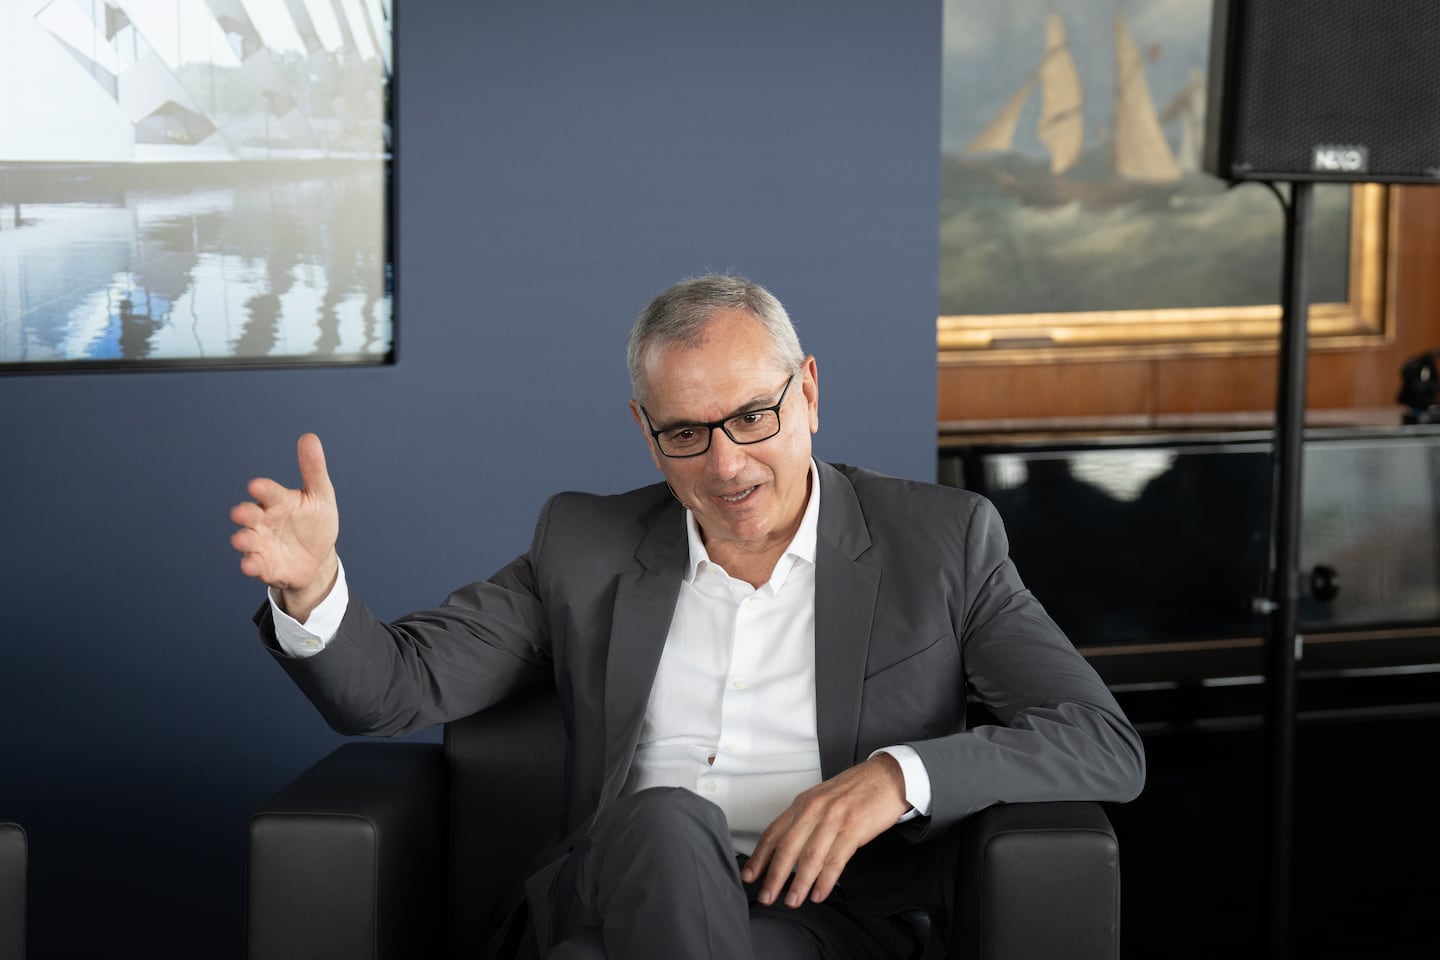 An image of Puig chairman and CEO Marc Puig in conversation.